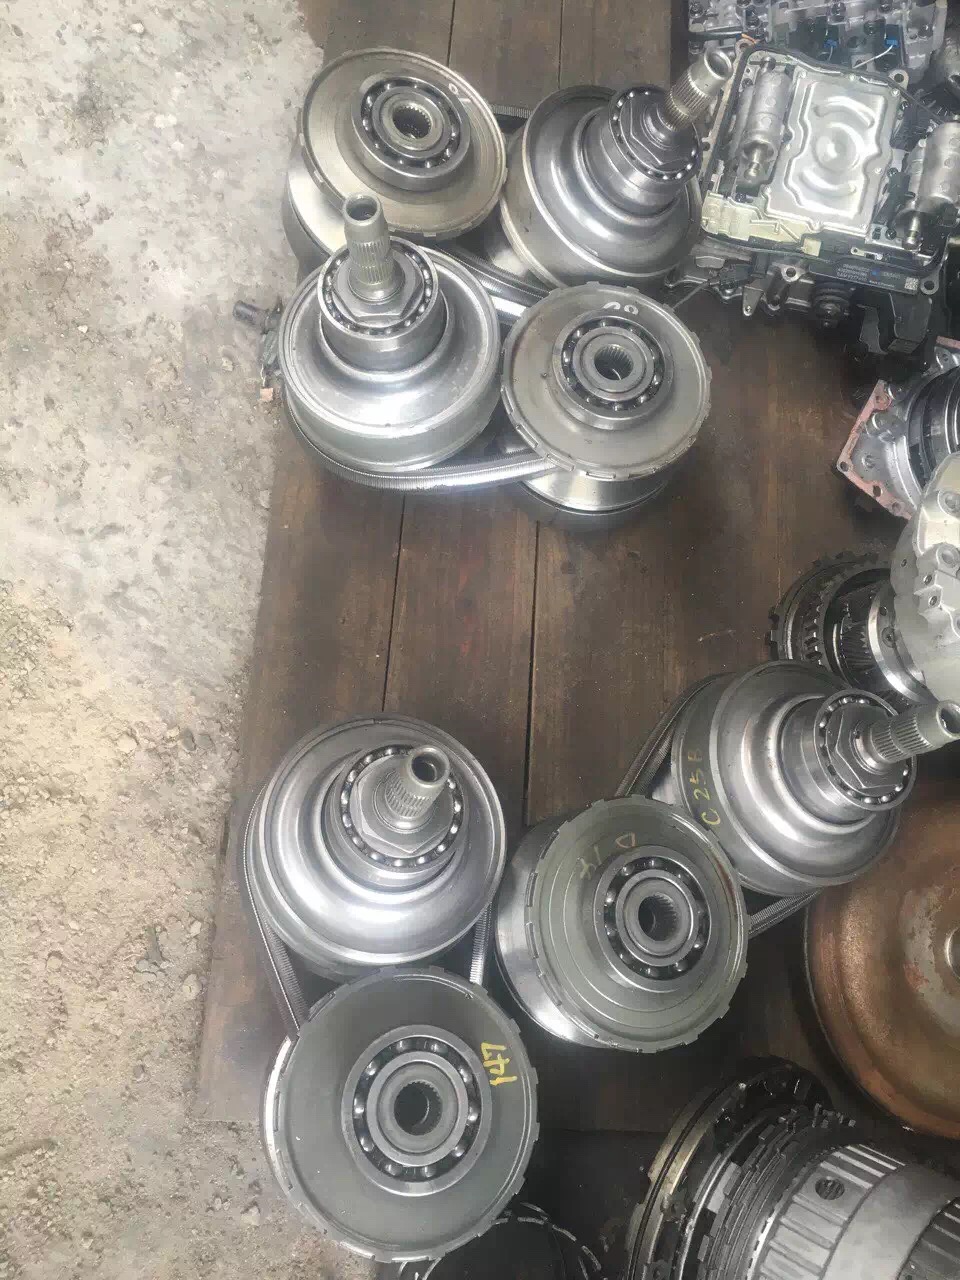 K112 and K114 automatice transmission parts, it is smililar to use